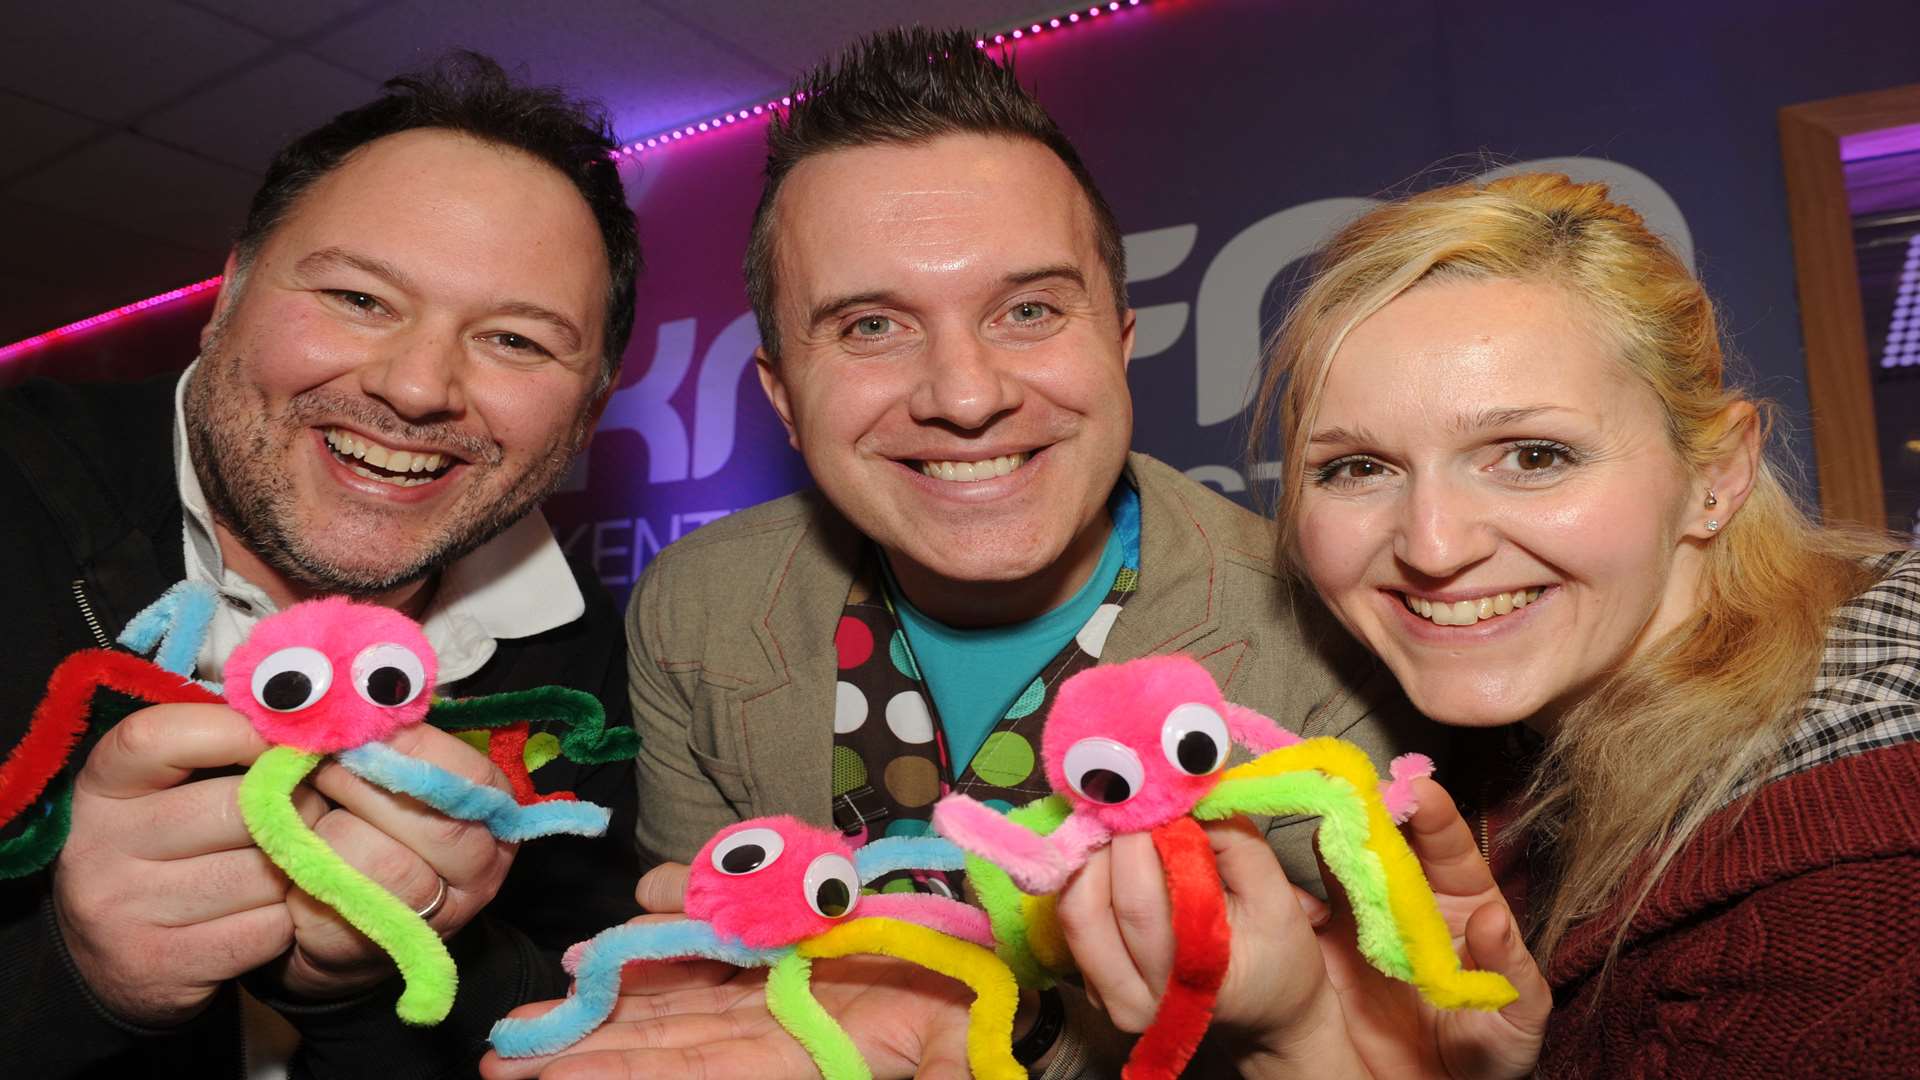 Cbeebies star Mister Maker, aka Phil Gallagher, makes Pom Pom bugs with Garry and Emma from kmfm breakfast on a previous visit to the station.